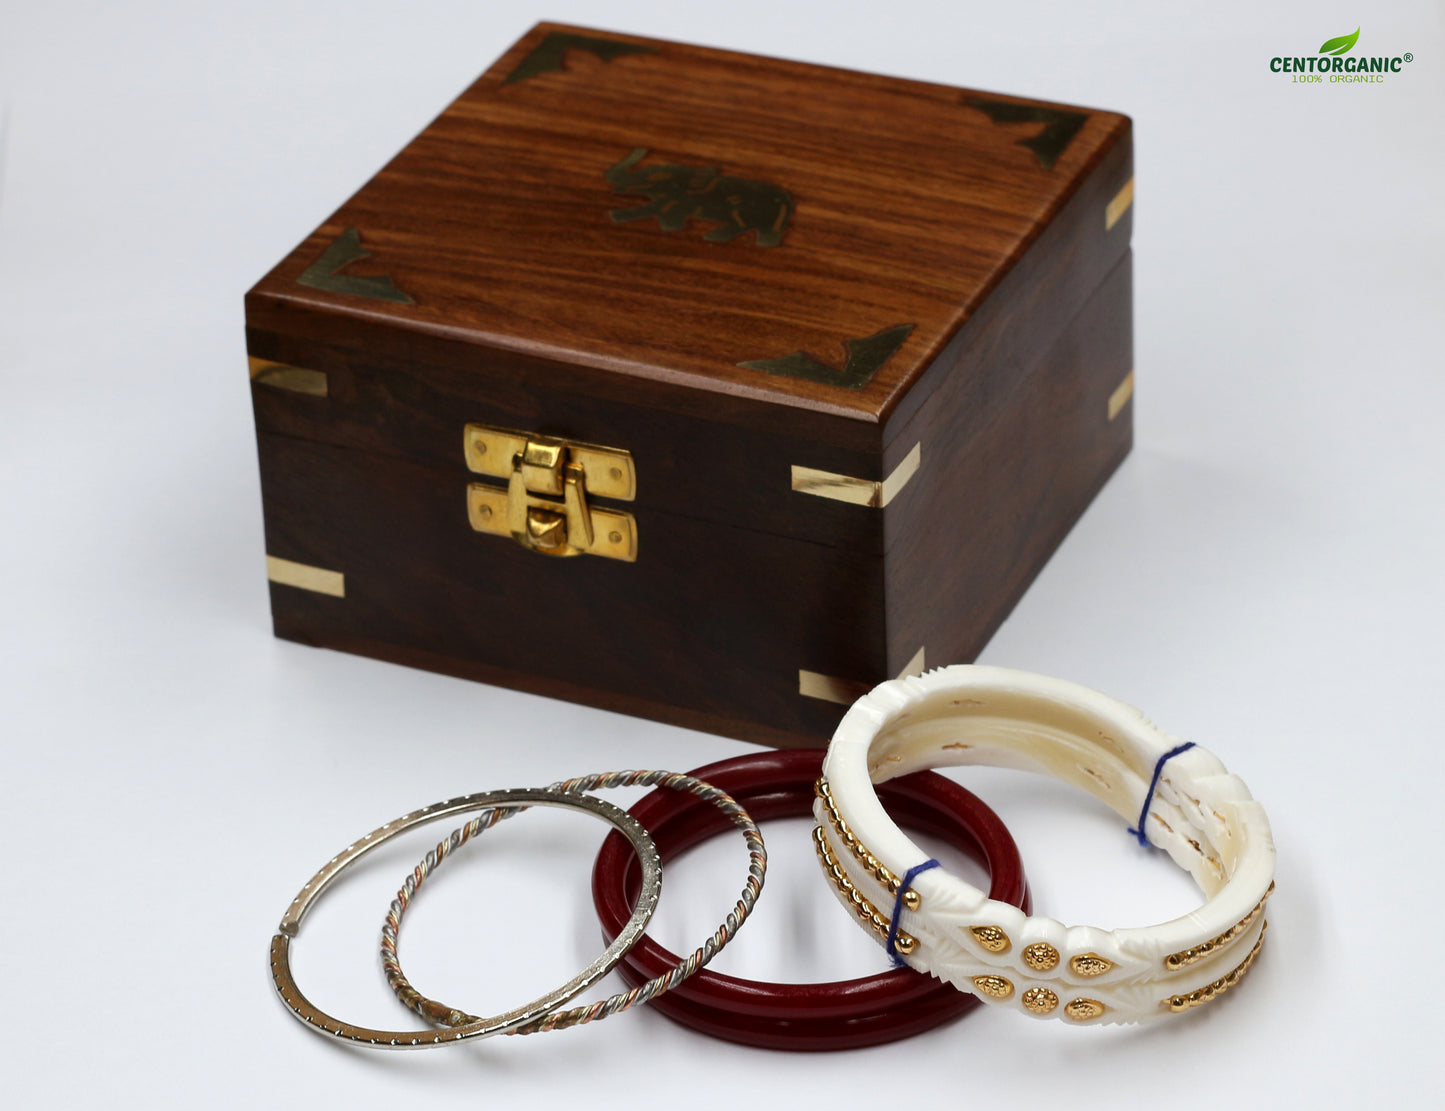 Centorganic Gold Plated sankha pola bangles for women, 1 pair of sankha, 1 pair of red pola, 2 iron noa, with free wooden jewellery box. (Design code: CSBM02)